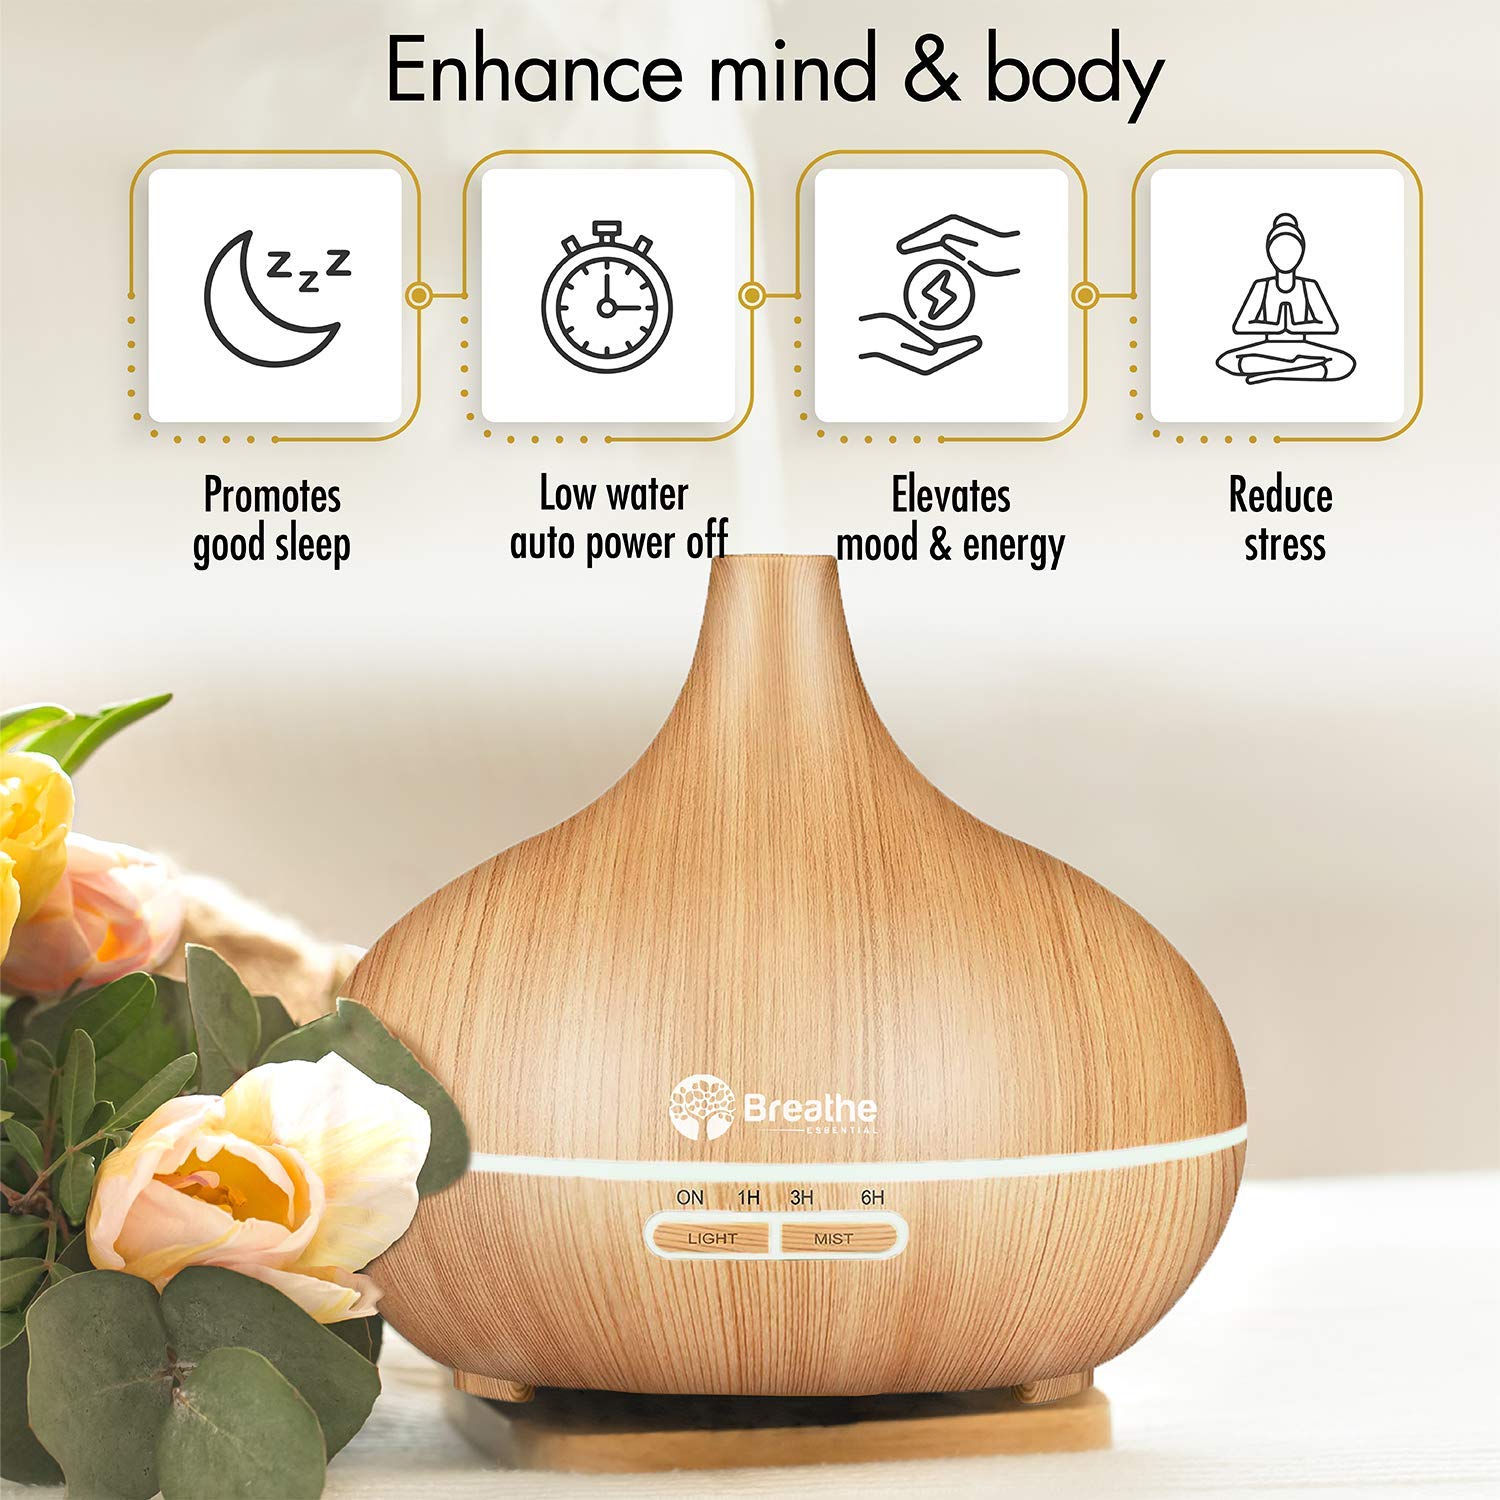 Breathe Essential Oil Diffuser | 550ml Diffusers for Essential Oils with Cleaning Kit & Measuring Cup, 18 Hour Runtime, 16 LED Light Settings & Auto Power Off (Natural Oak)